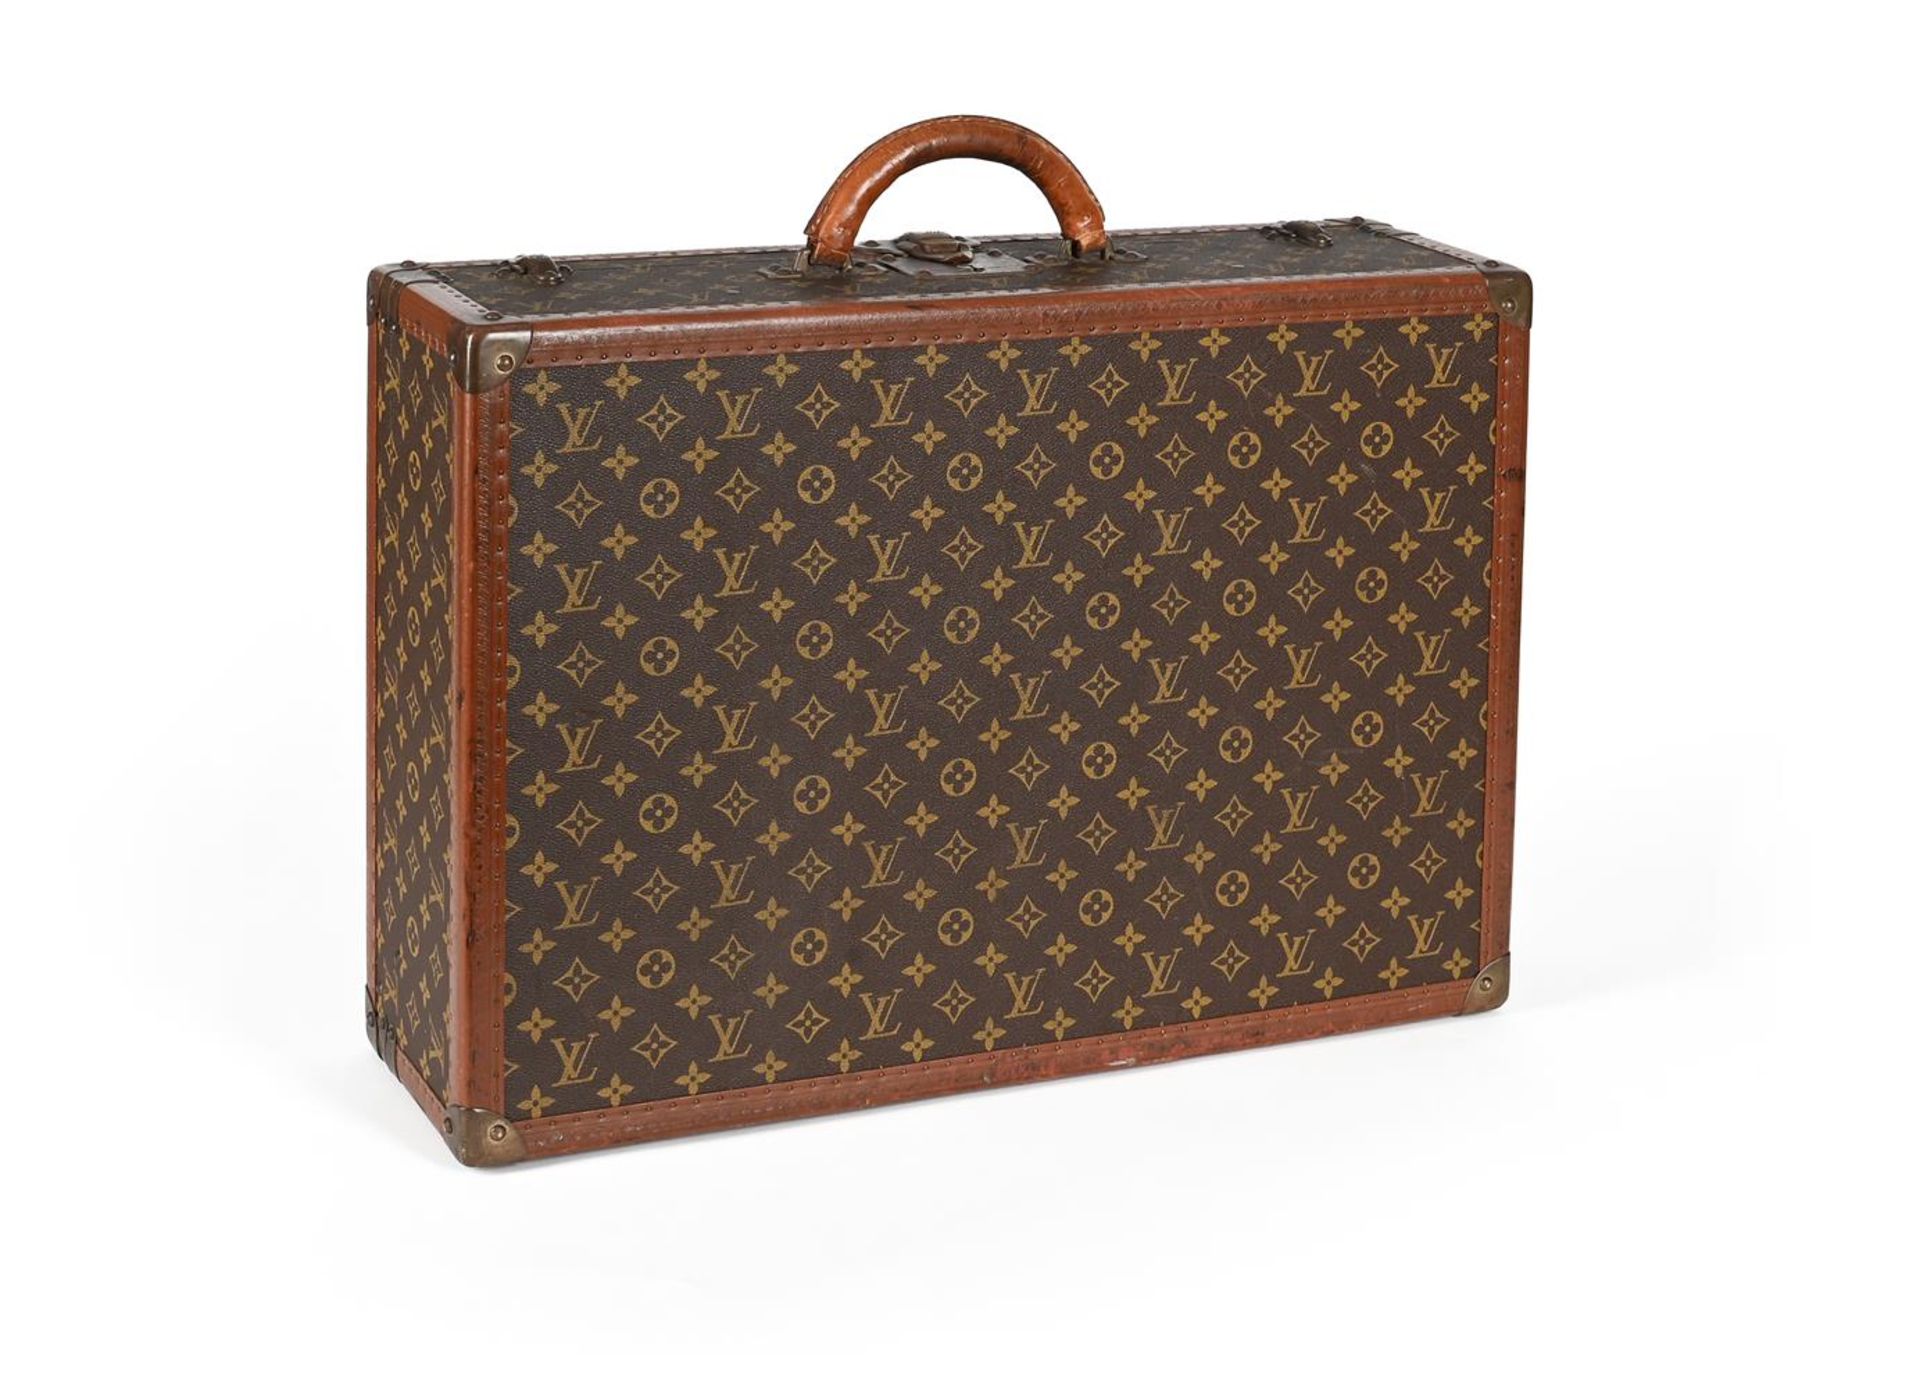 LOUIS VUITTON A MONOGRAMMED COATED CANVAS HARD SUITCASE